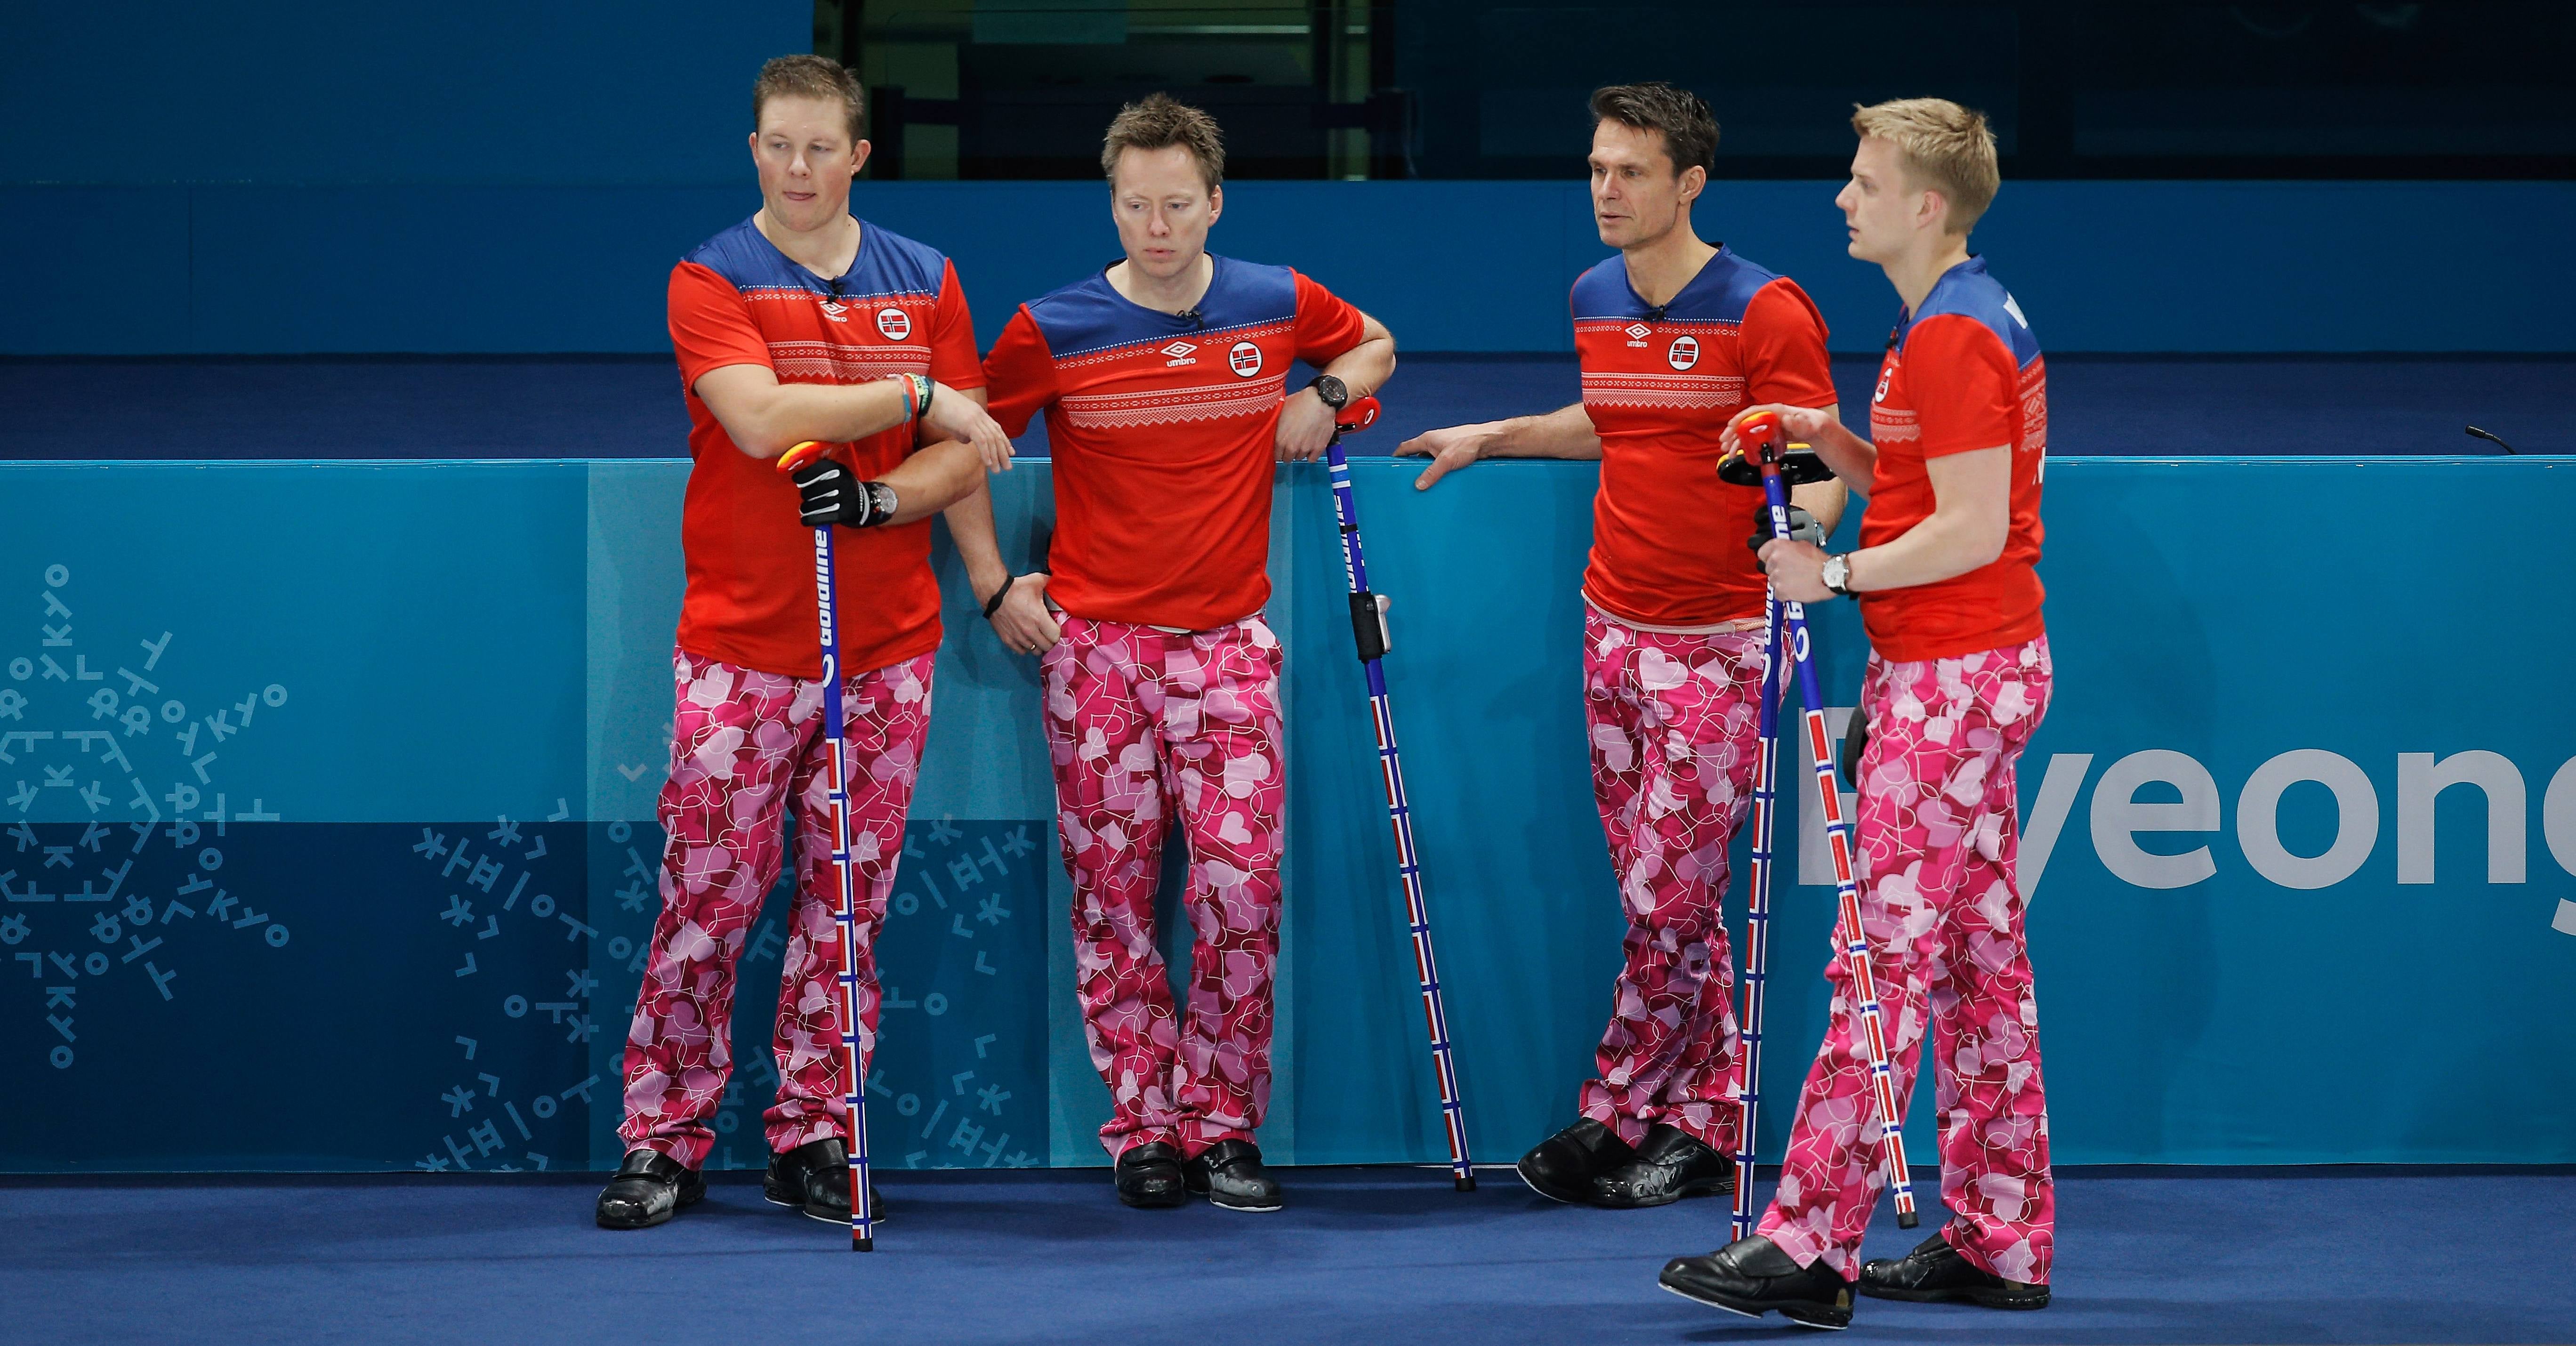 Norway's curling team makes a splash with crazy pants